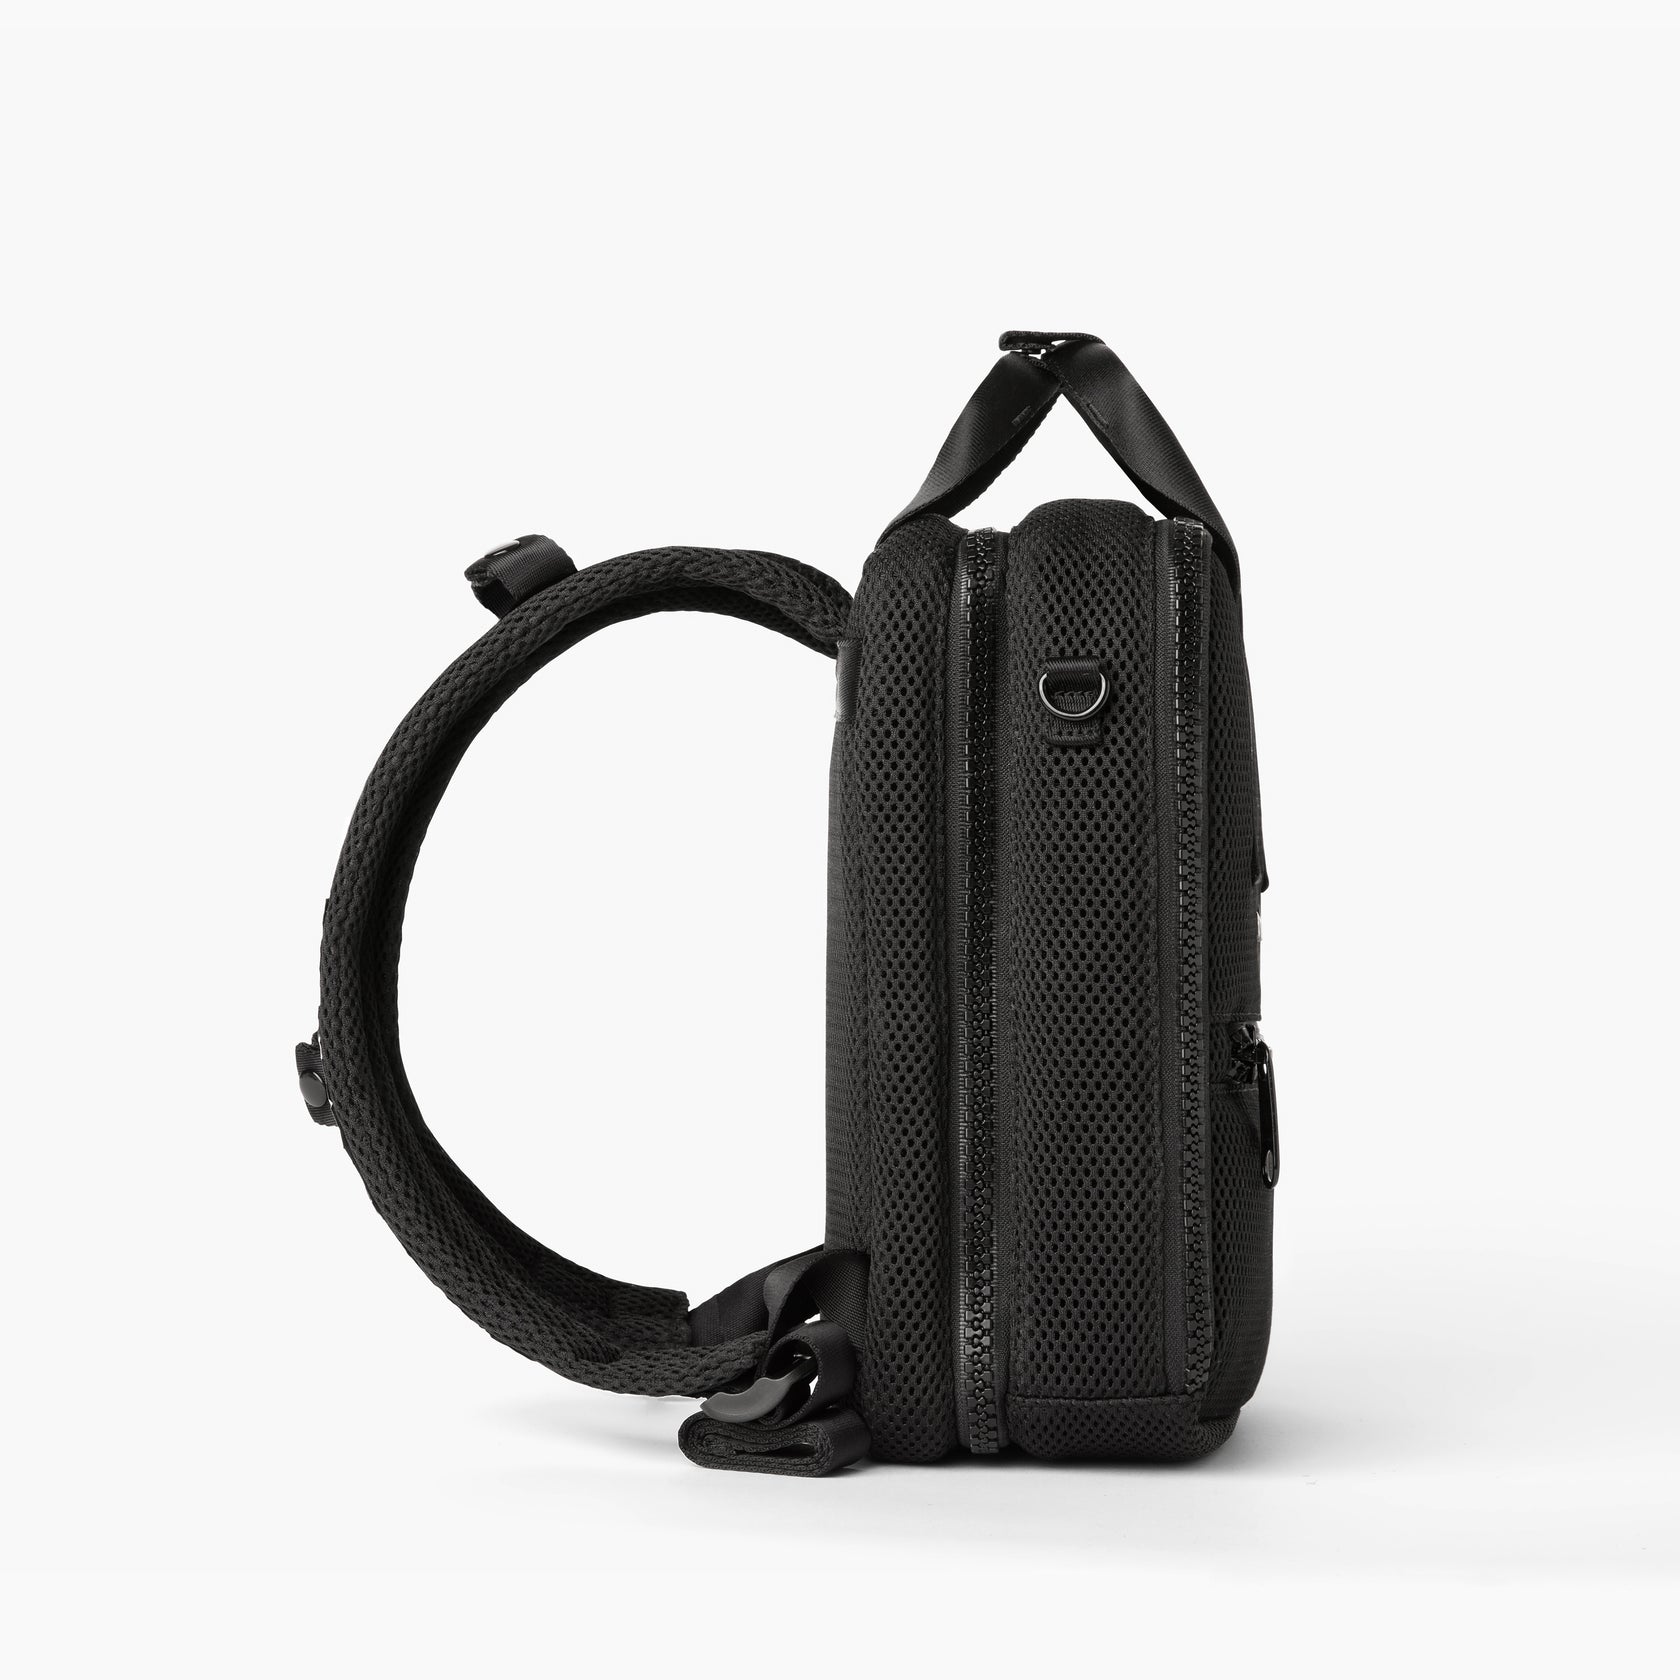 The All-Day Bag | Cute Hydration Backpack - Eron Roche